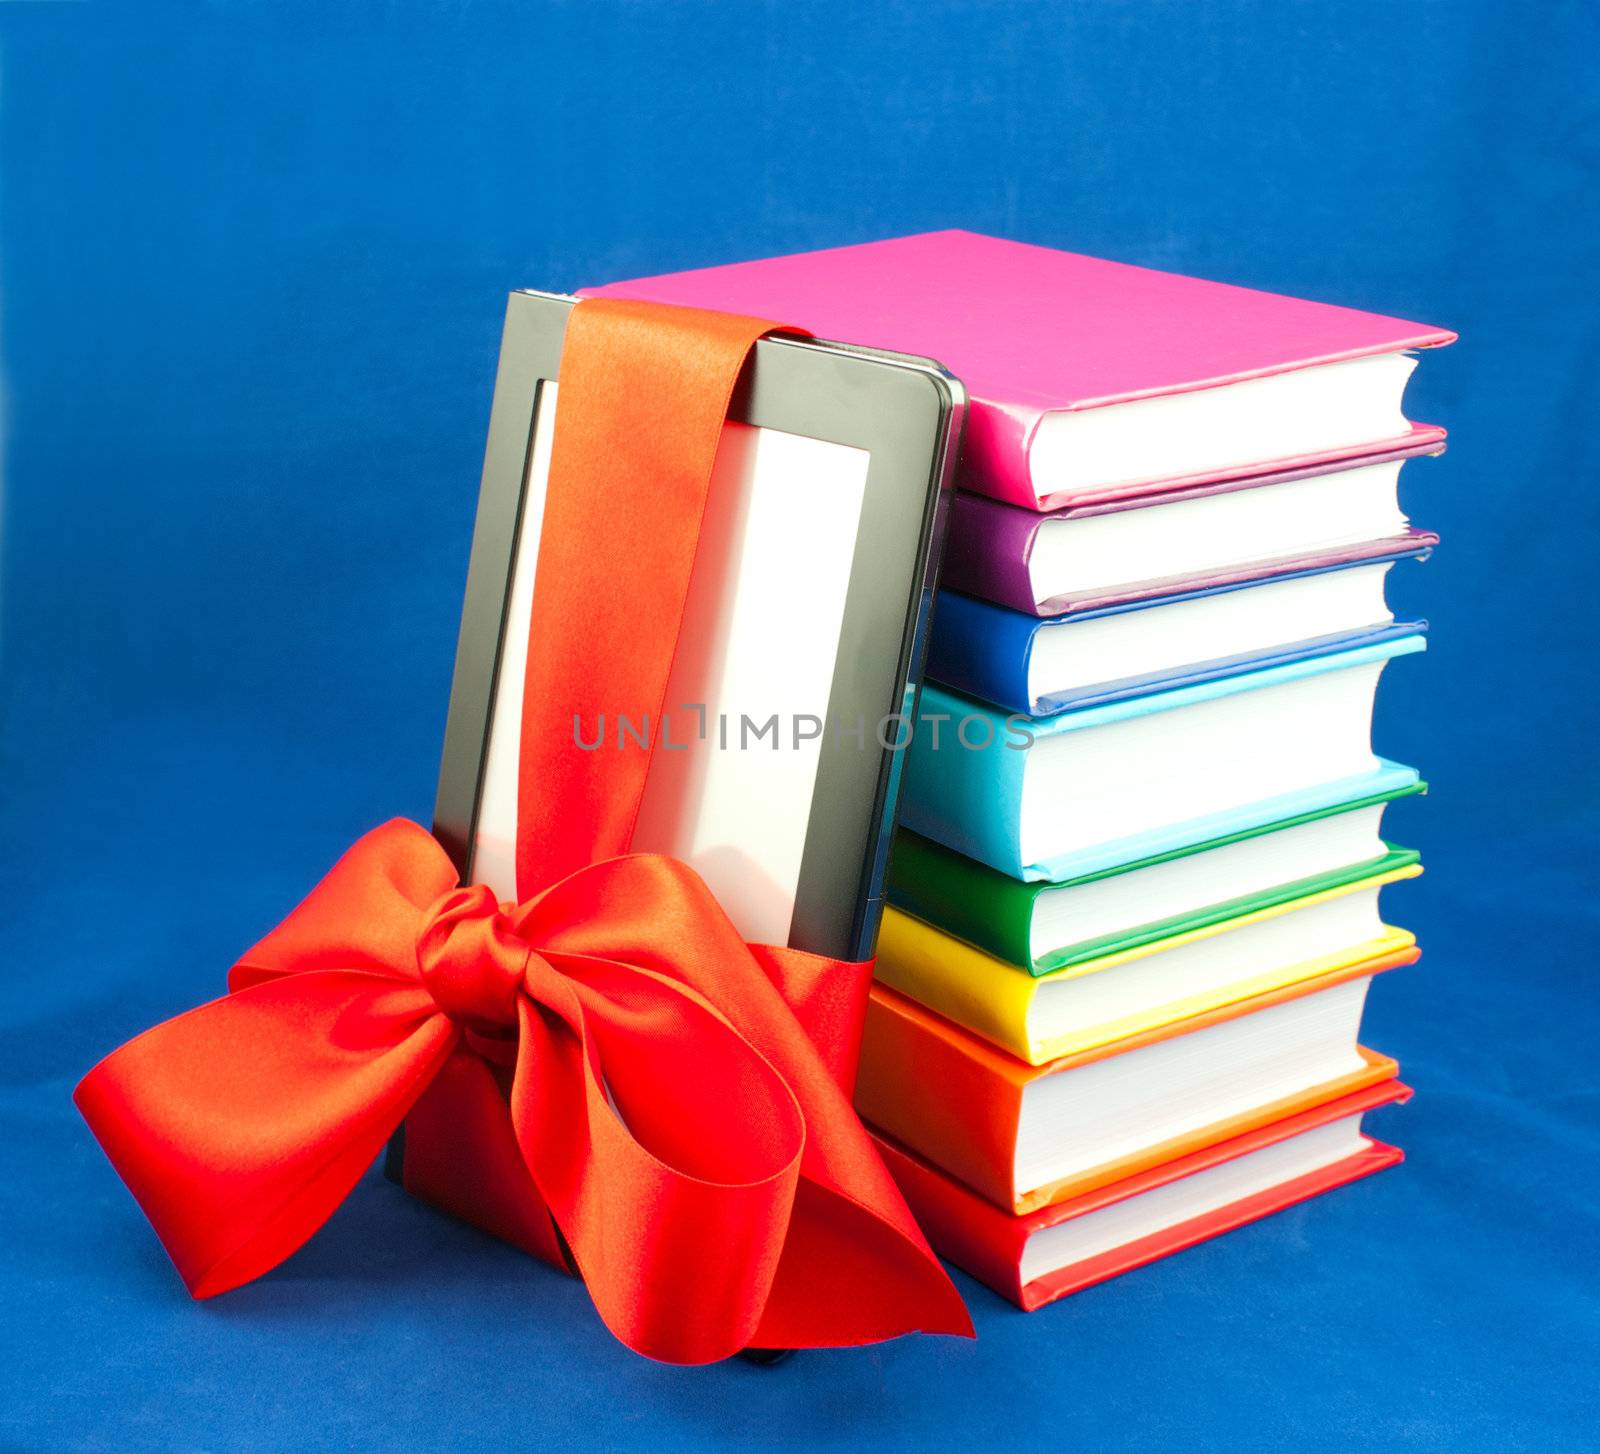 Electronic book reader tied up with red ribbon and stack of books